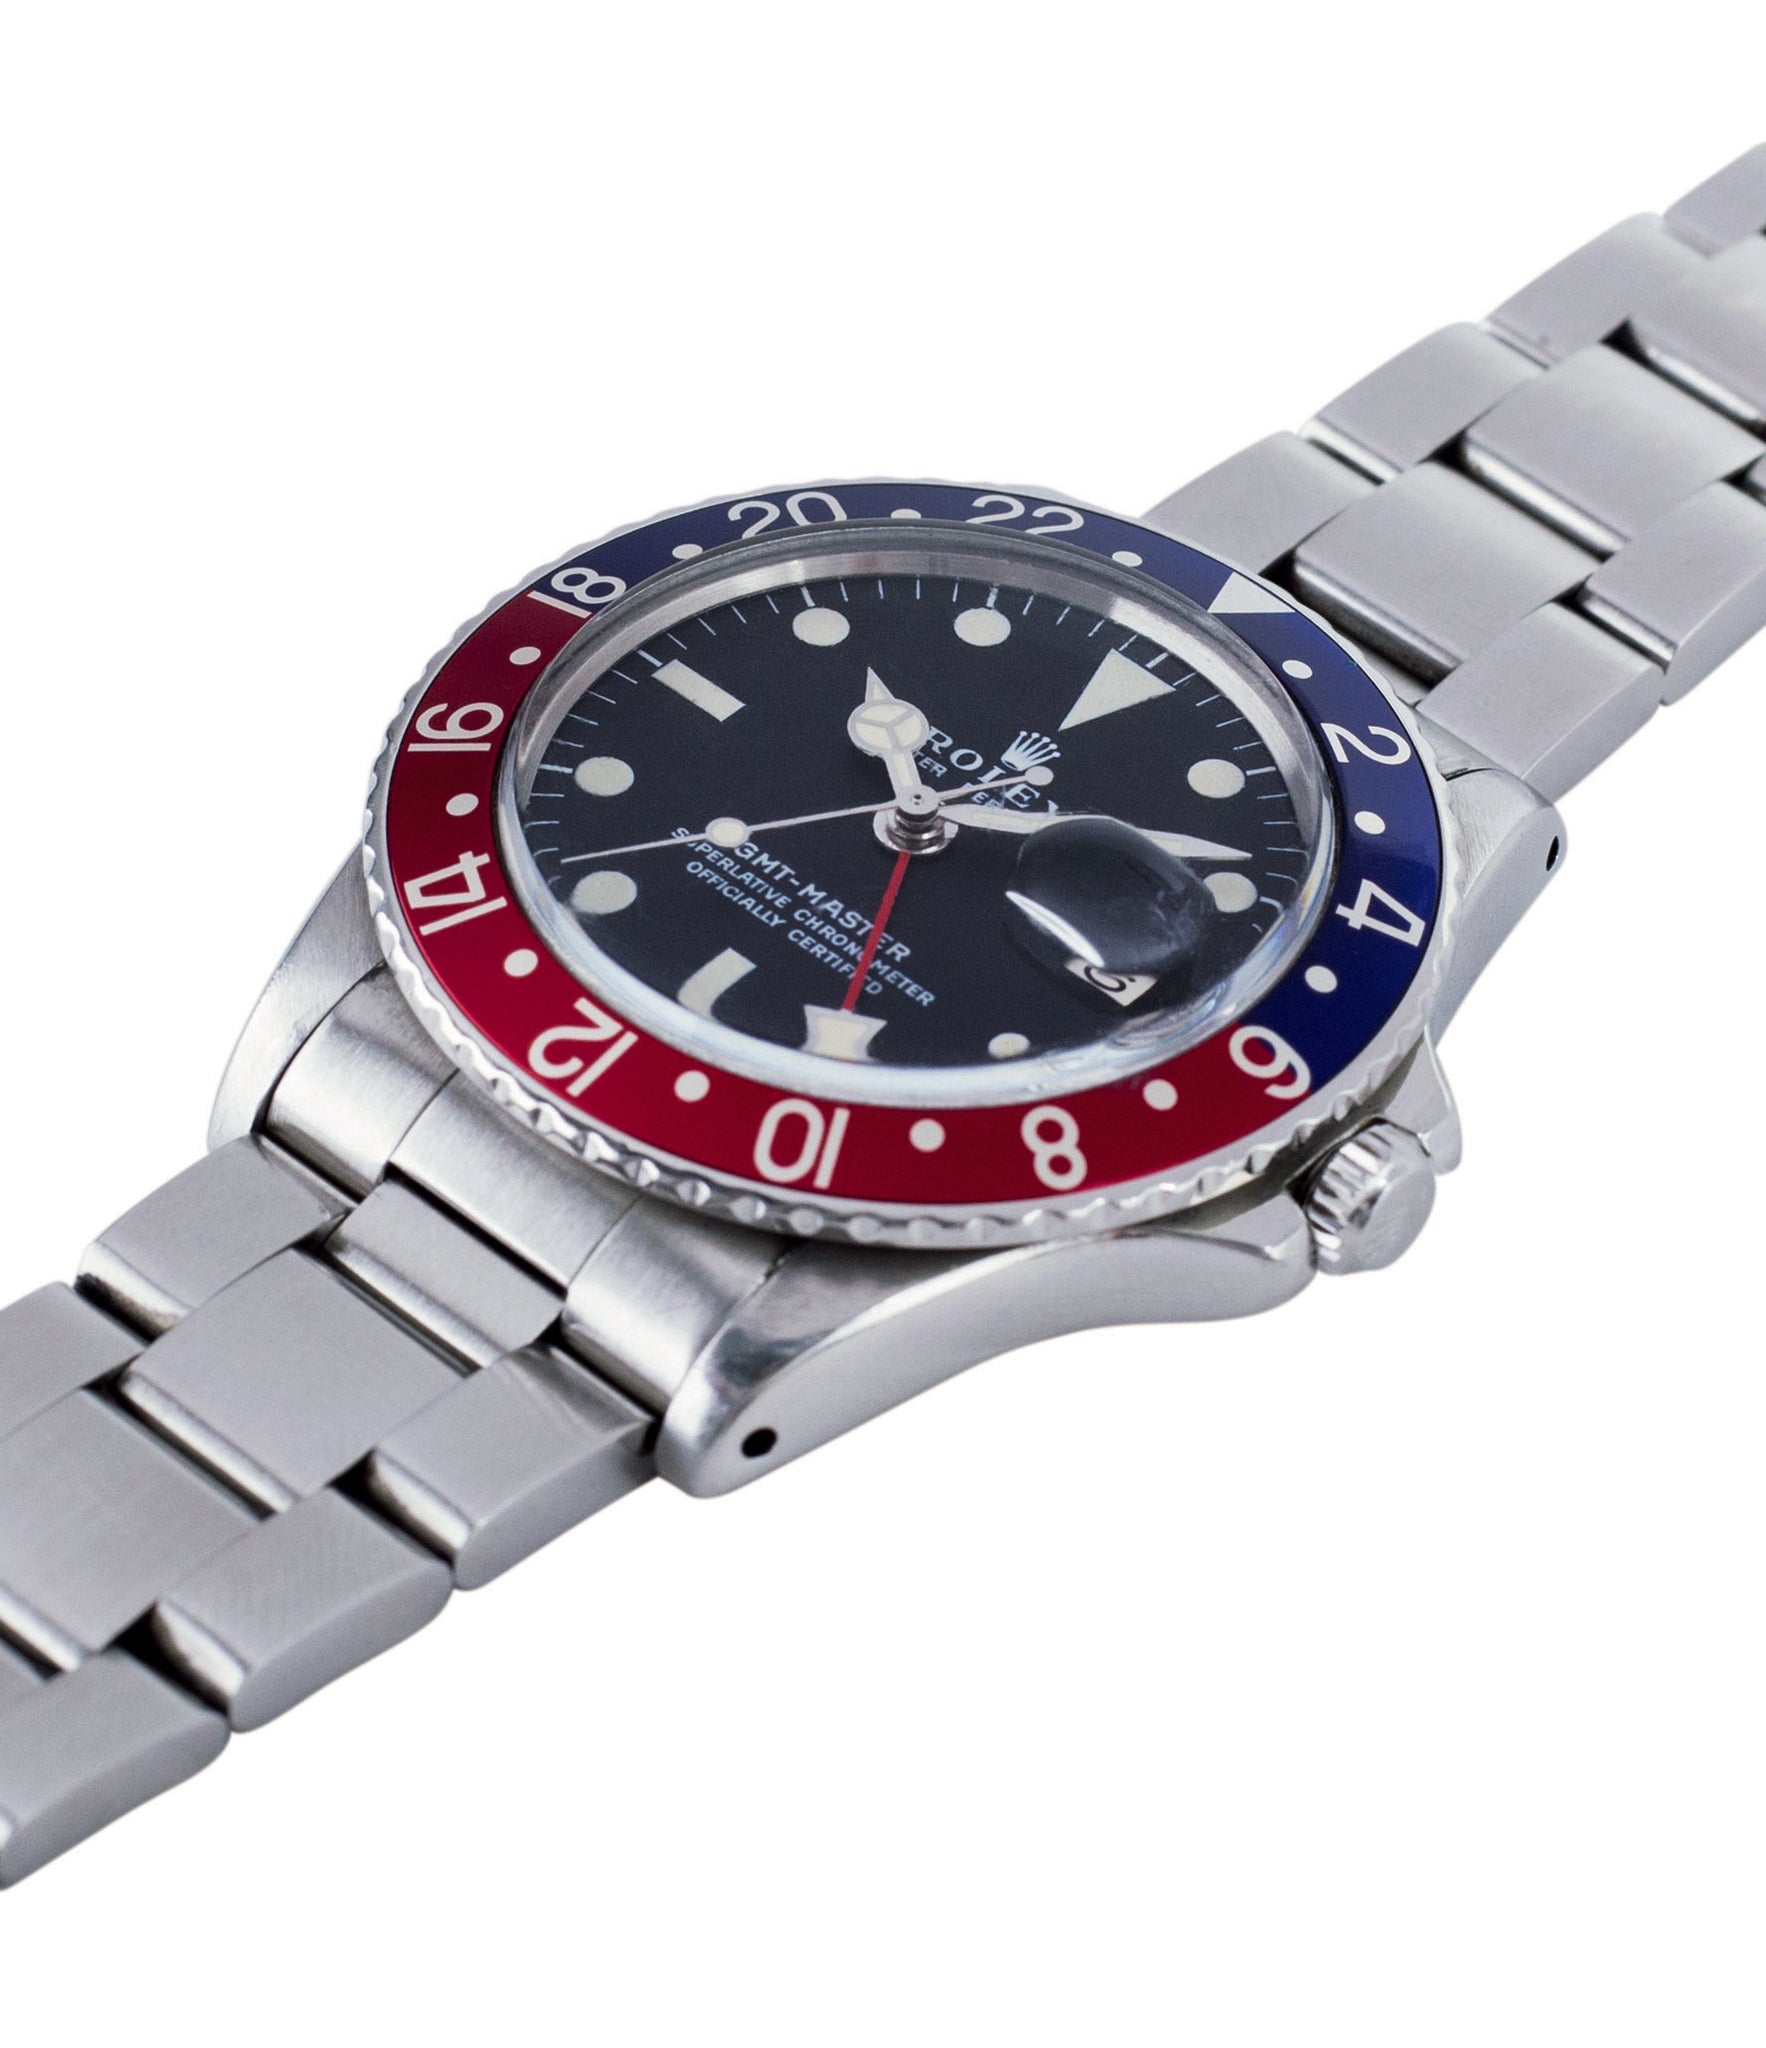 selling Rolex GMT Master 1675 vintage steel traveller sport watch Pepsi bezel for sale online at A Collected Man London vintage watch specialist